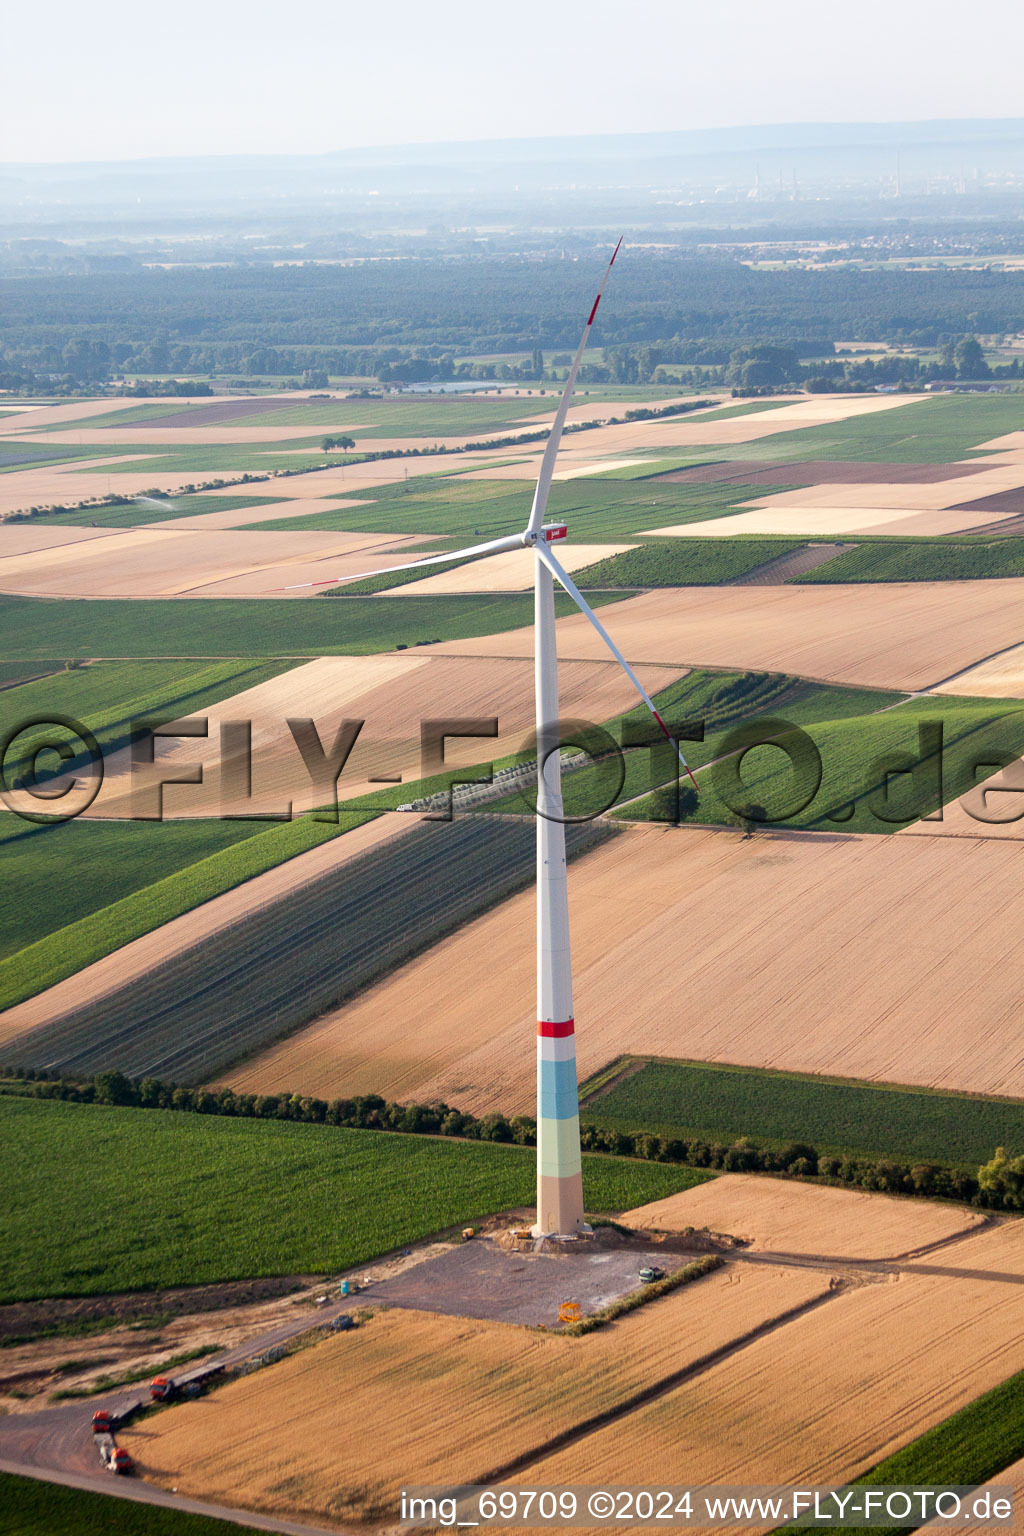 Oblique view of Wind farm construction in Offenbach an der Queich in the state Rhineland-Palatinate, Germany